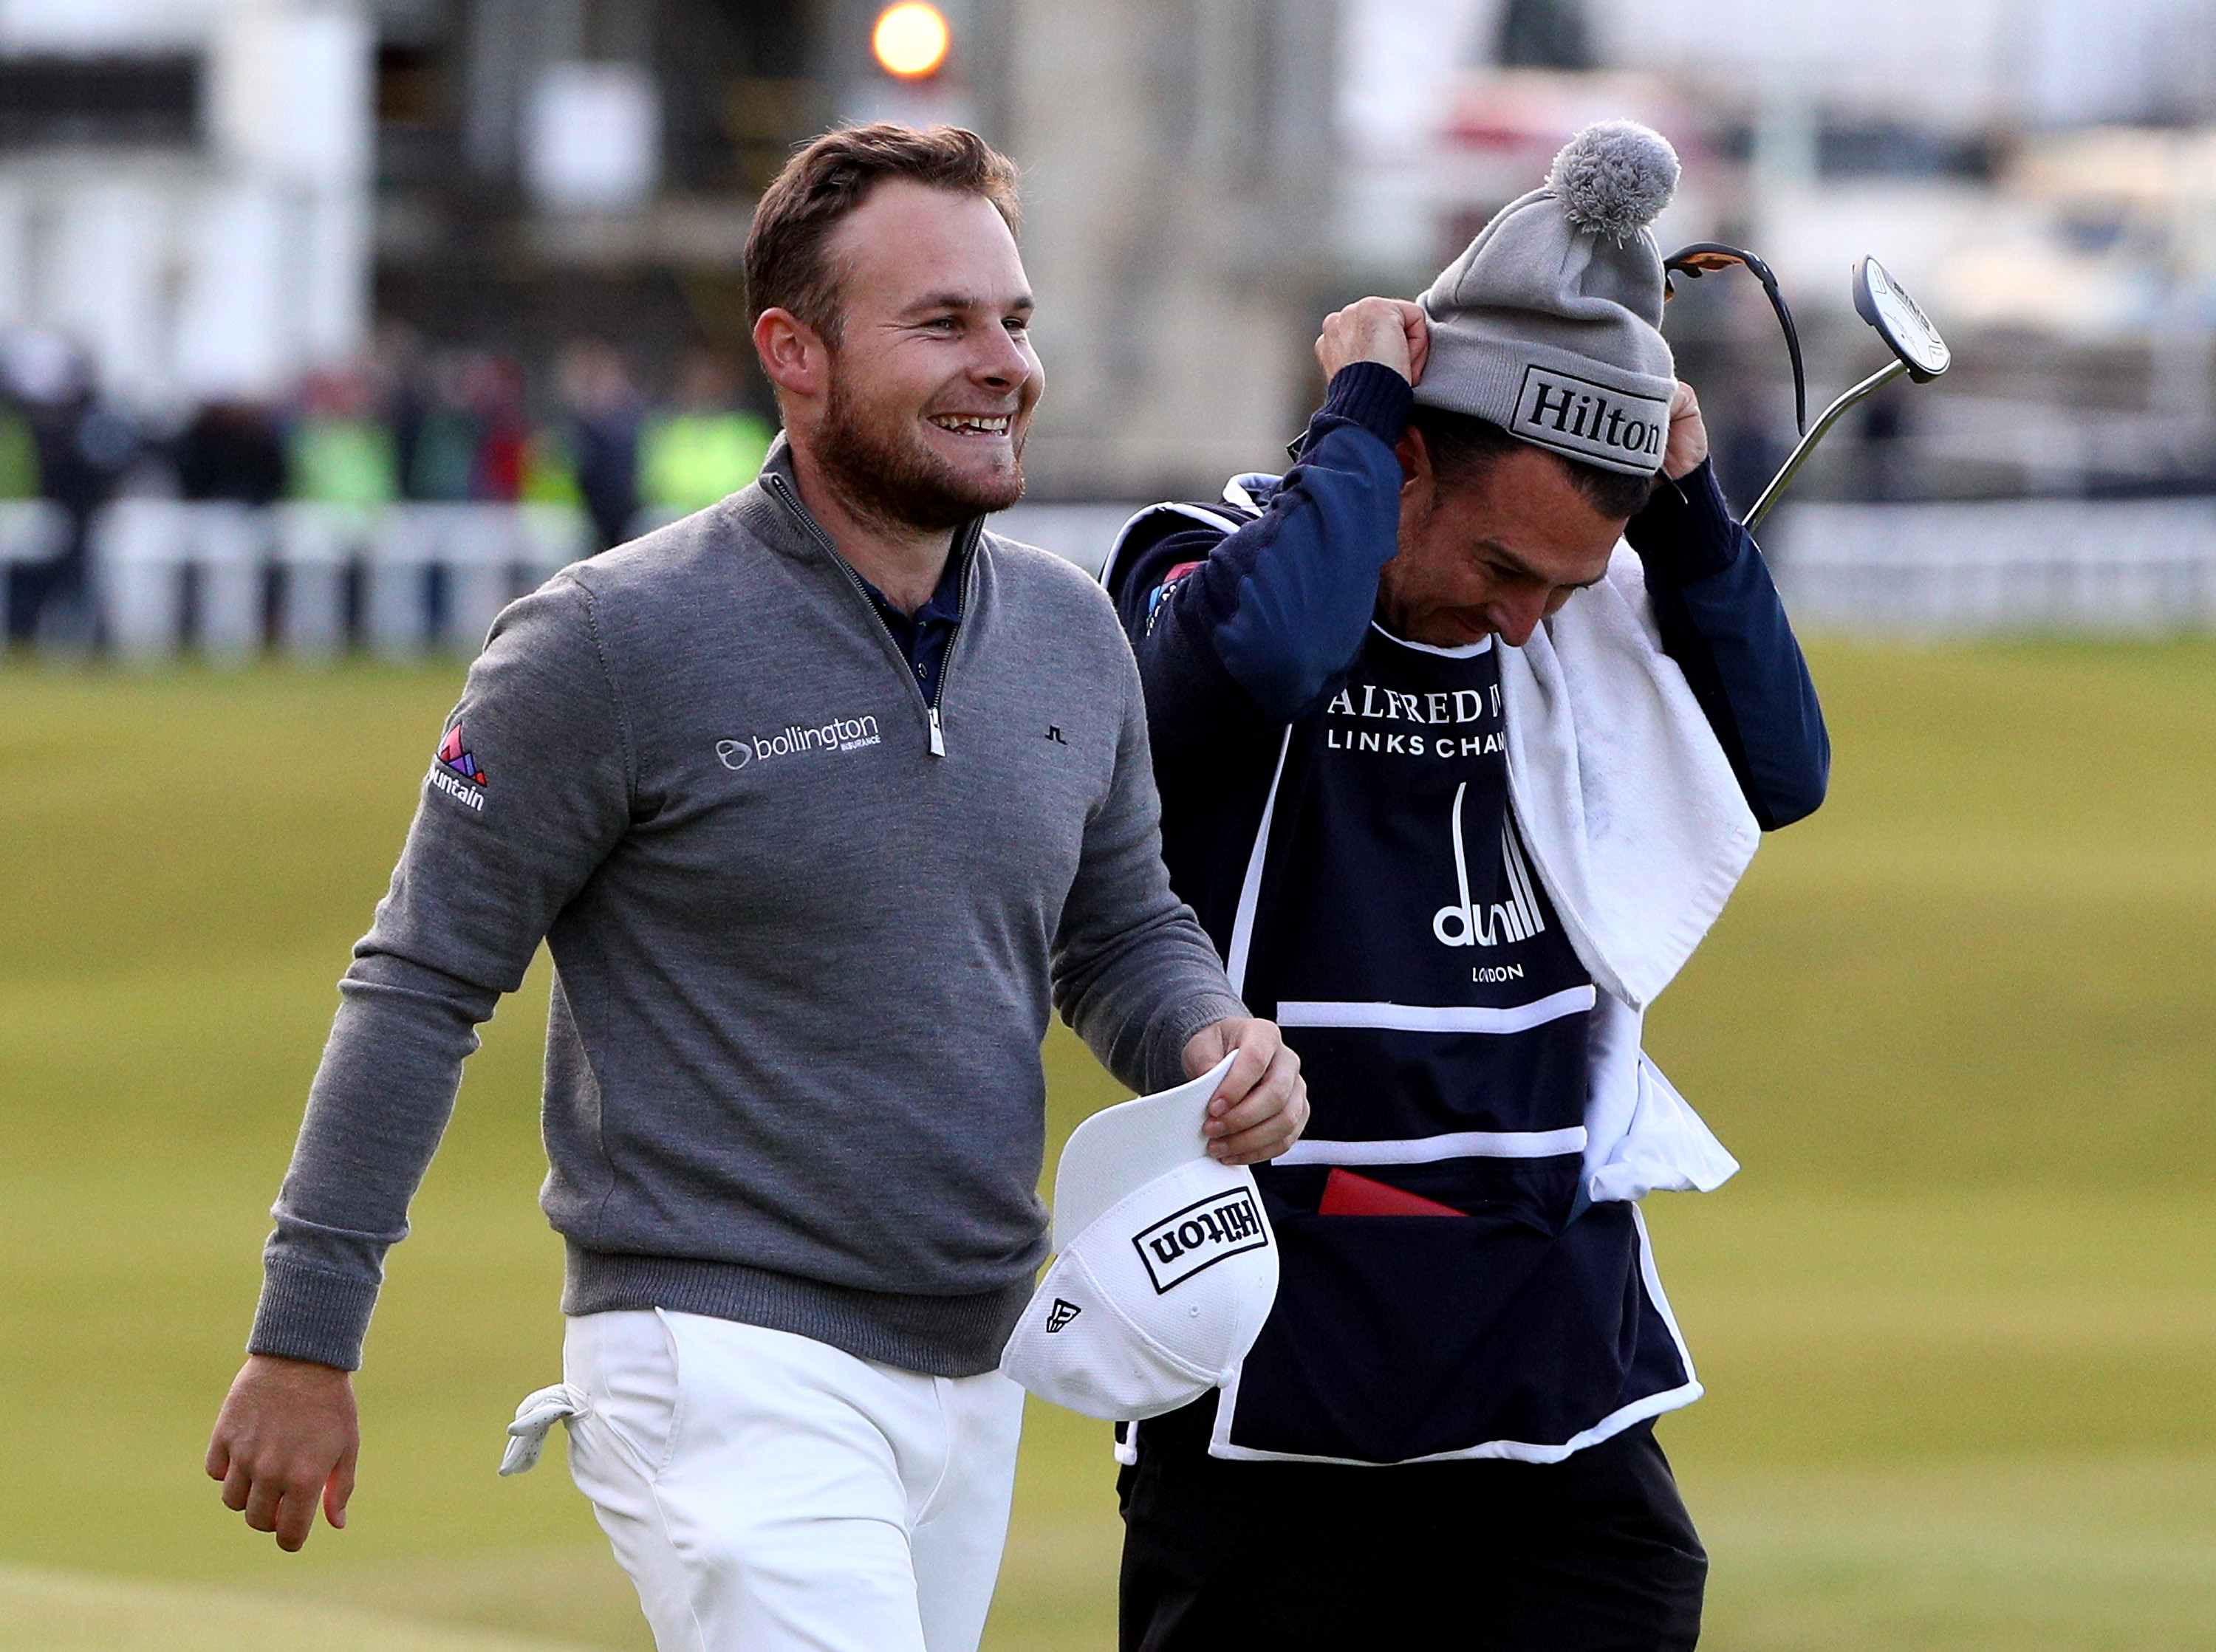 Weekend Winners: Hatton gets the job done at St Andrews